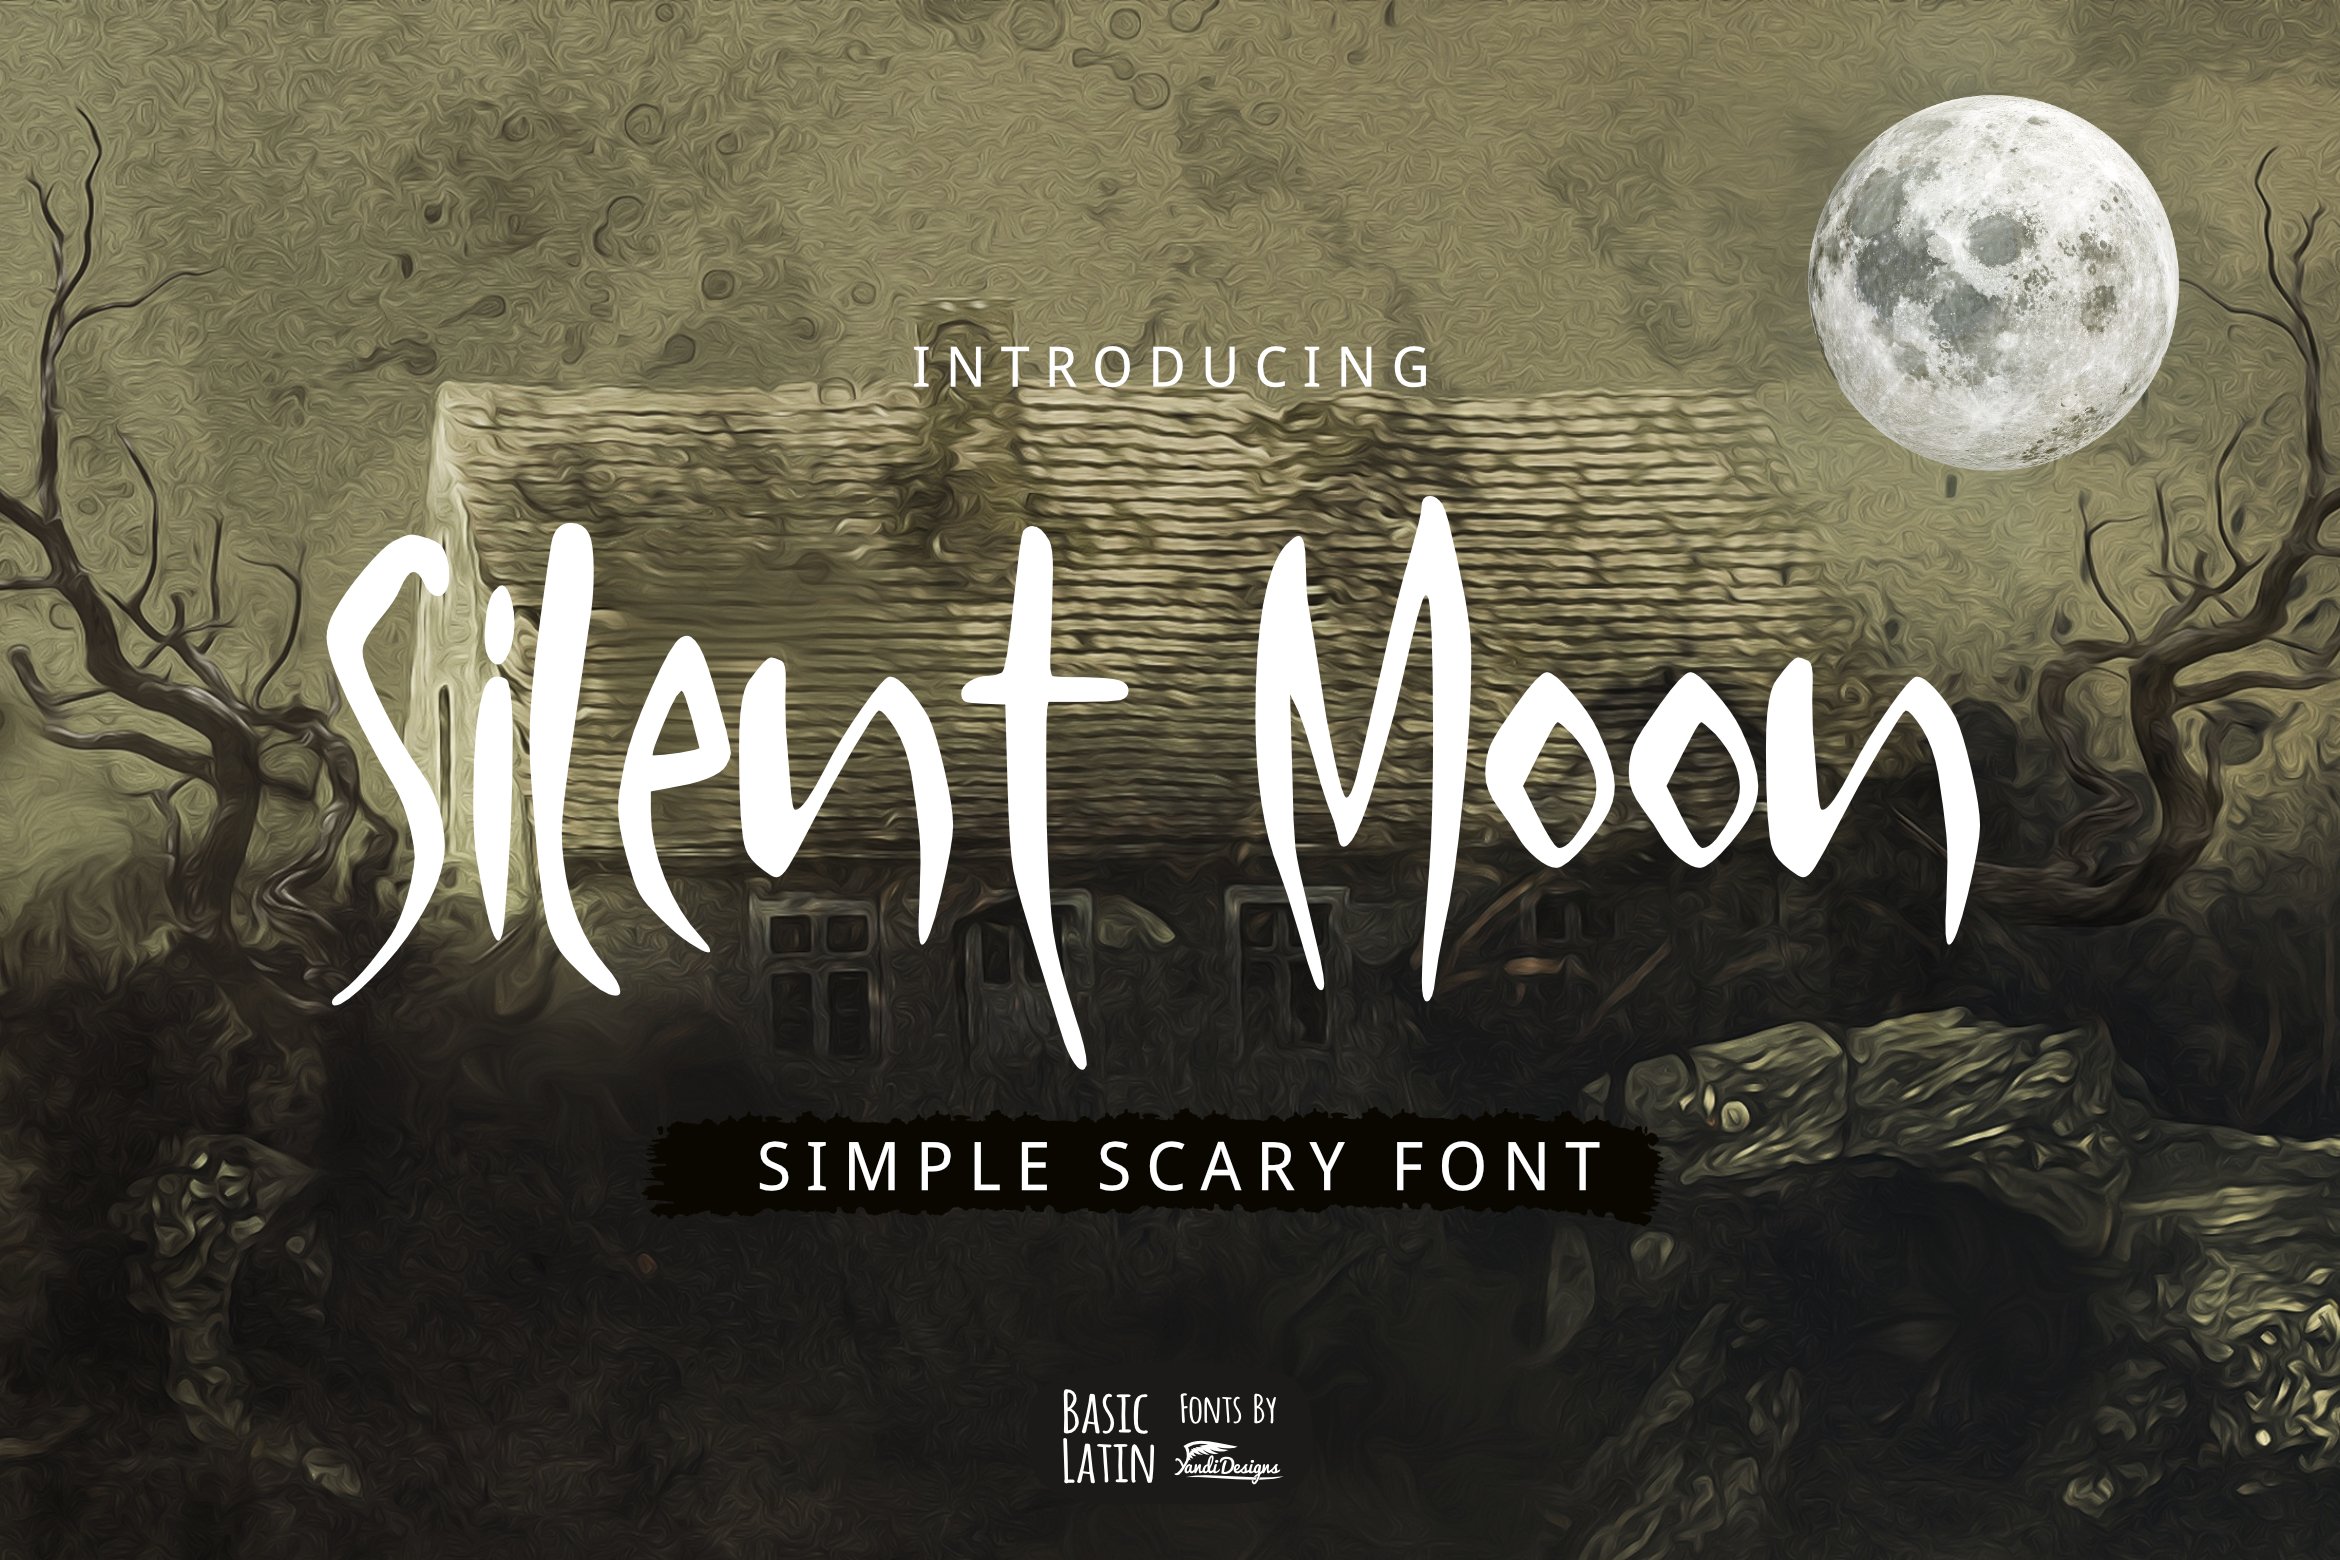 Silent Moon Scary Font cover image.